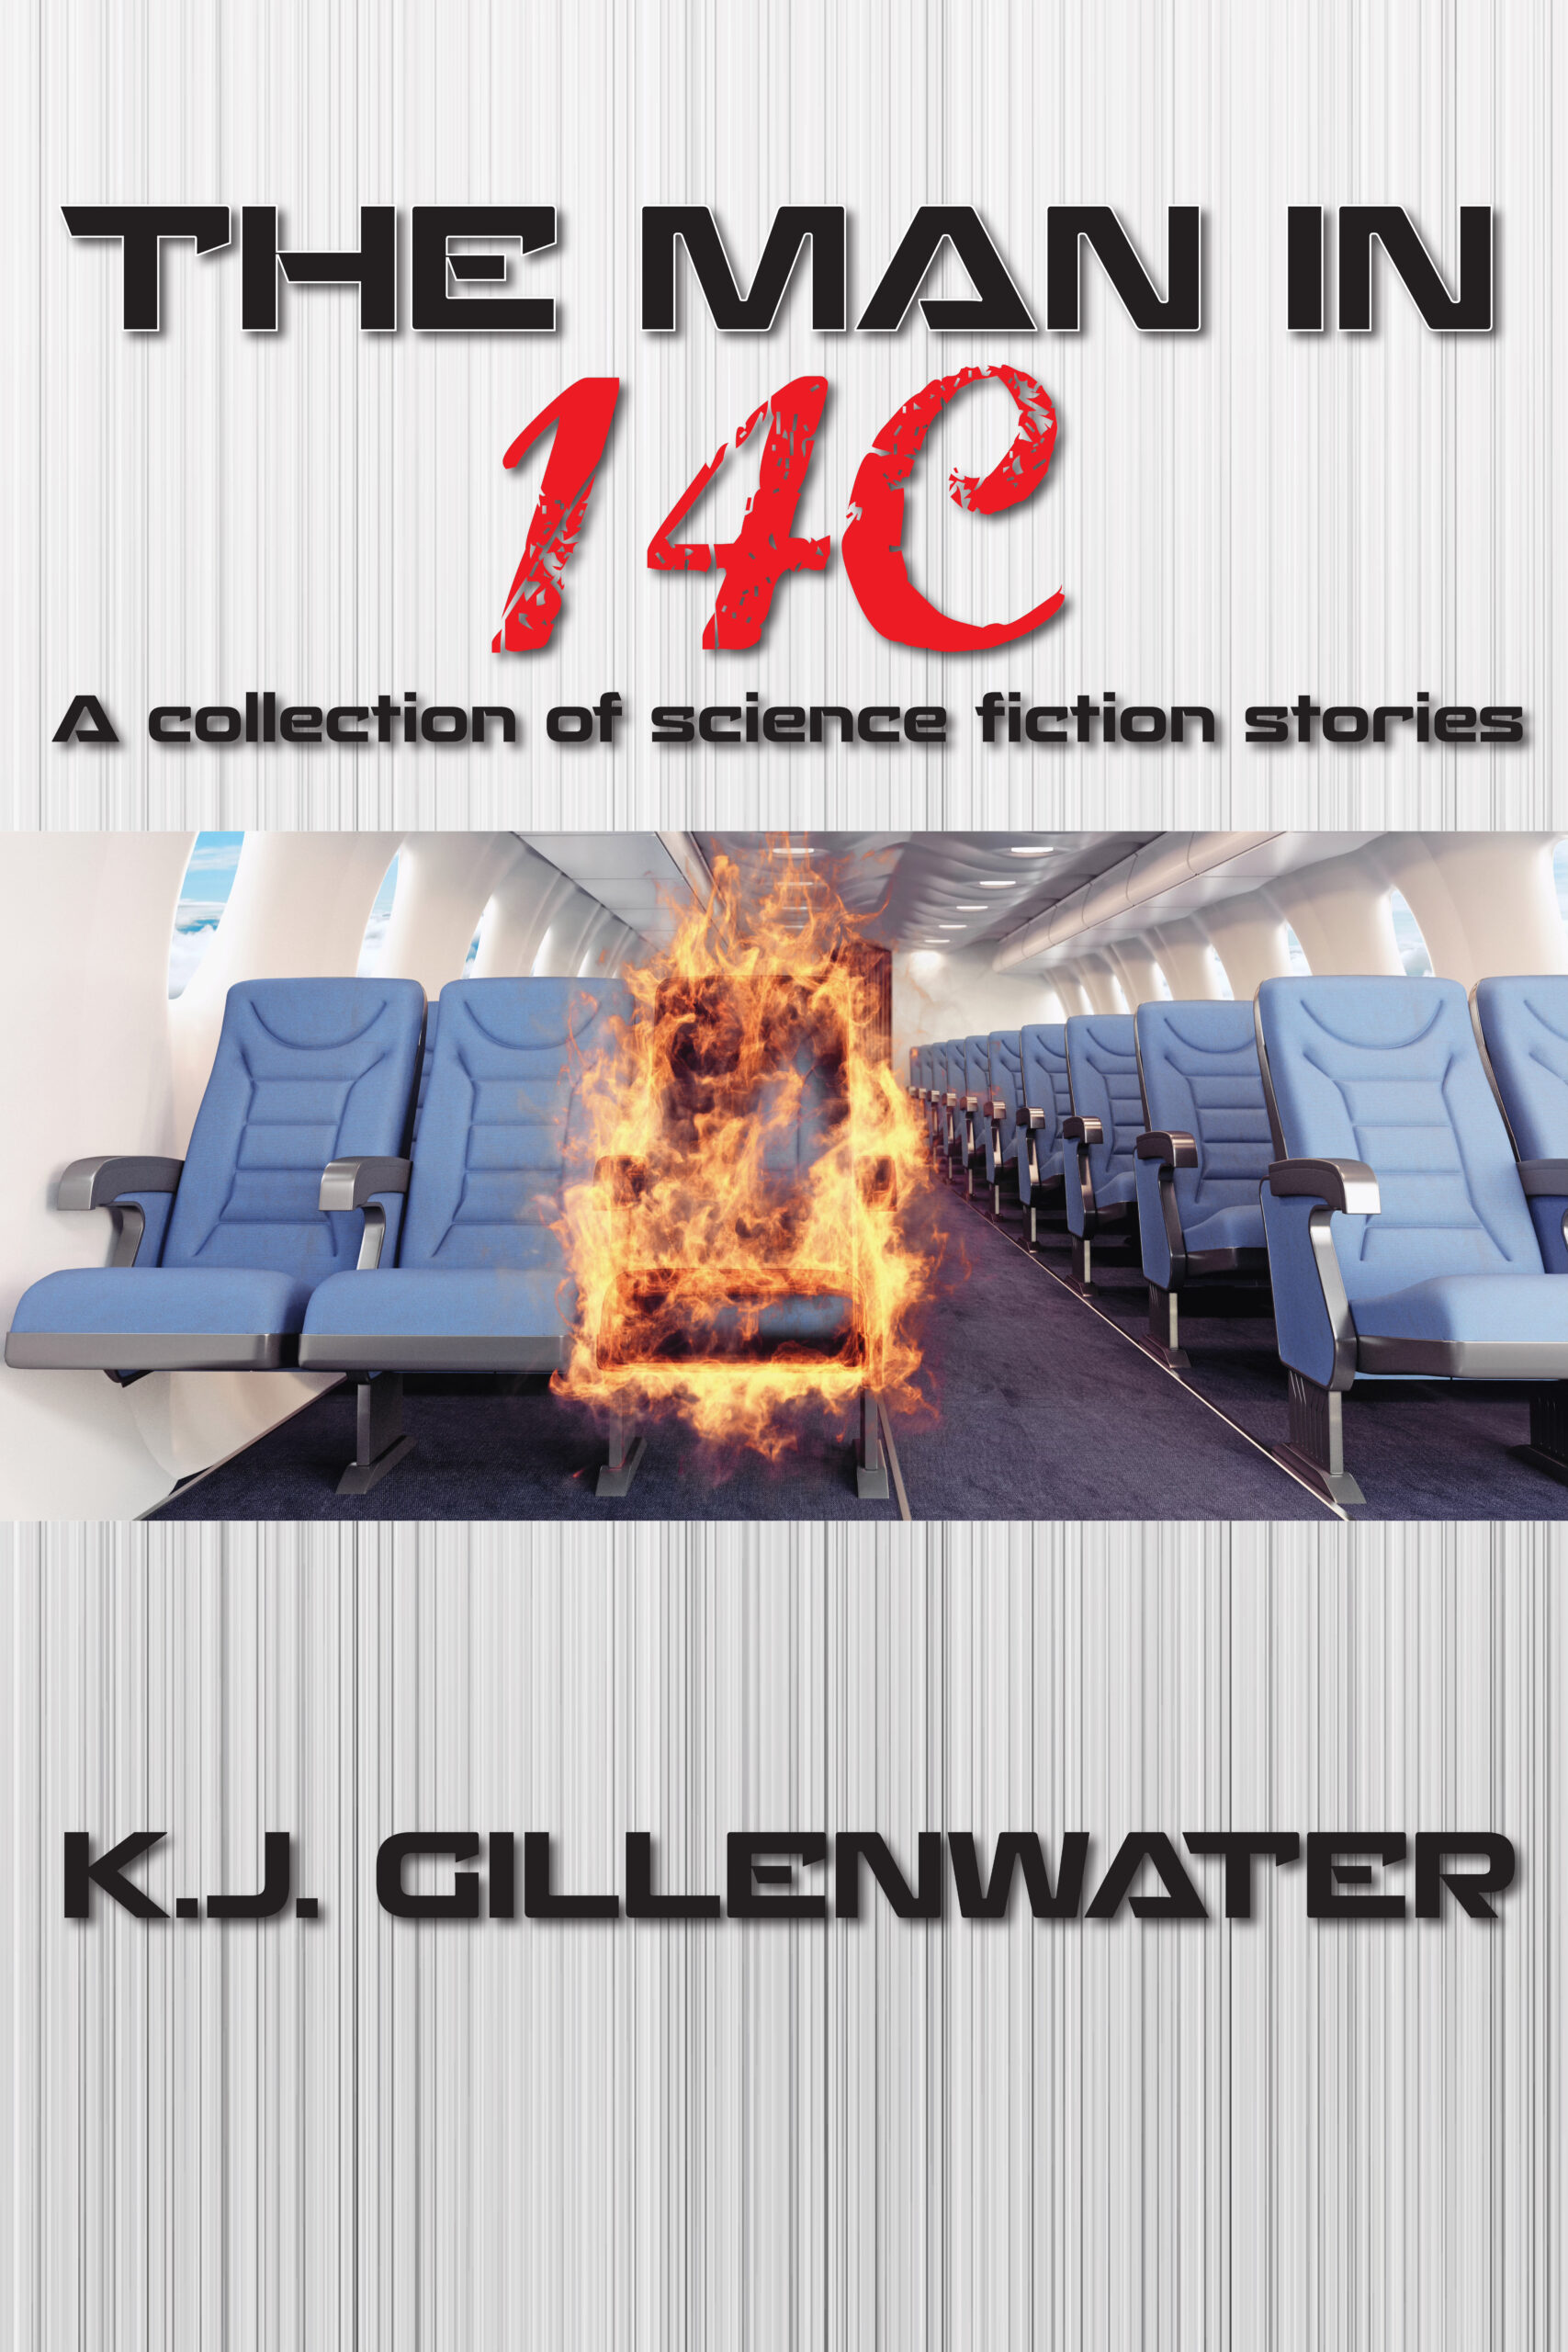 A book cover with an airplane on fire.